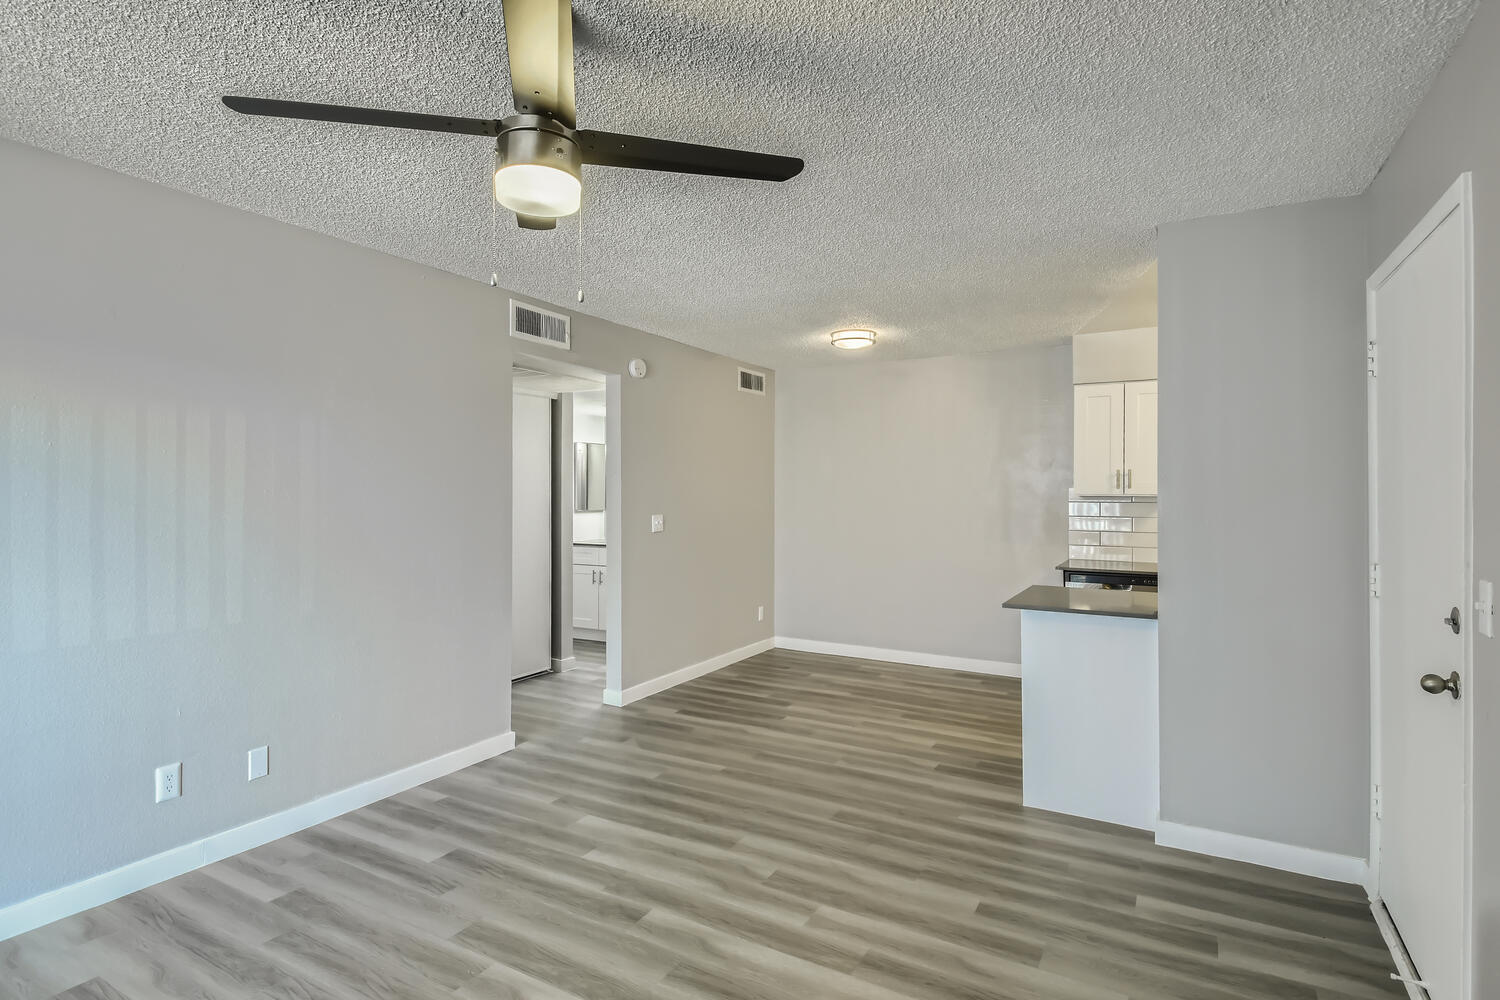 A living room, dining room, and a kitchen in an open-concept apartment at Rise North Ridge.